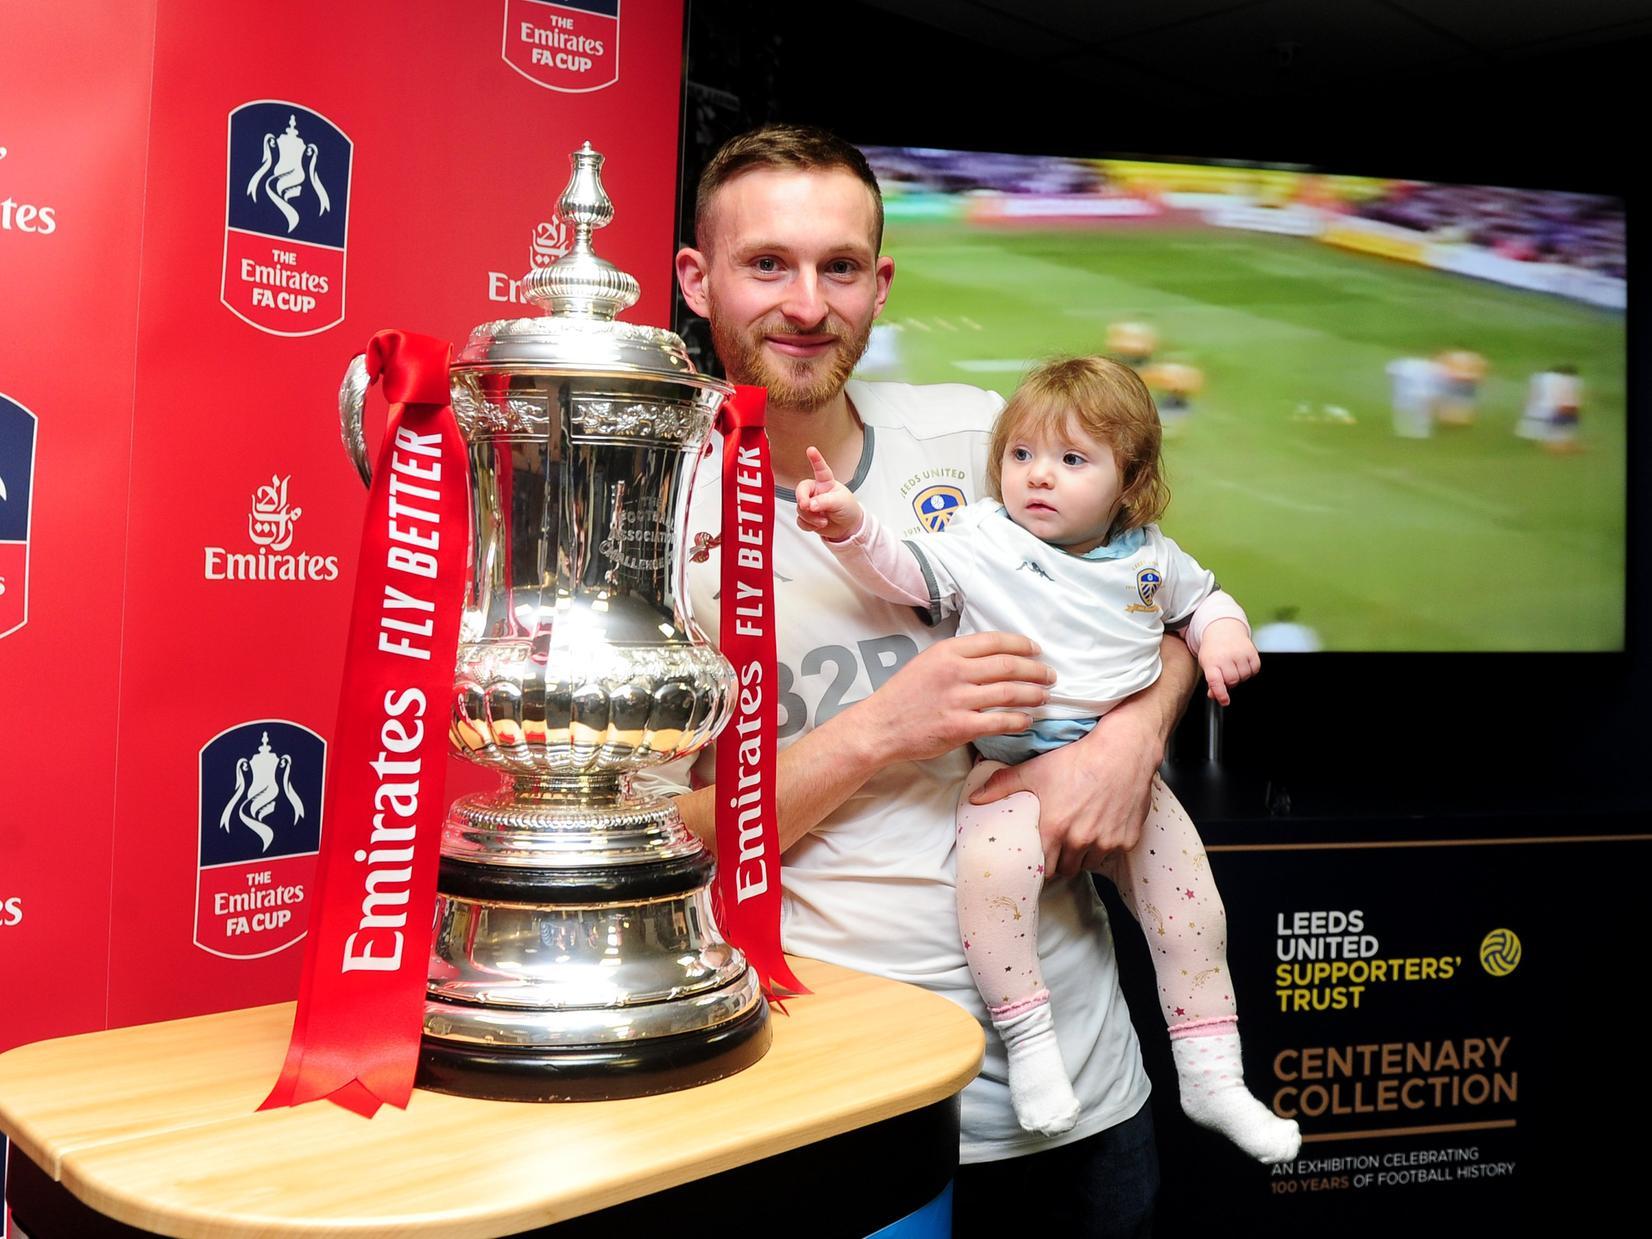 Dan Cole pictured with his daughter Daisy Cole aged 8 months - who wants a piece of the cup!